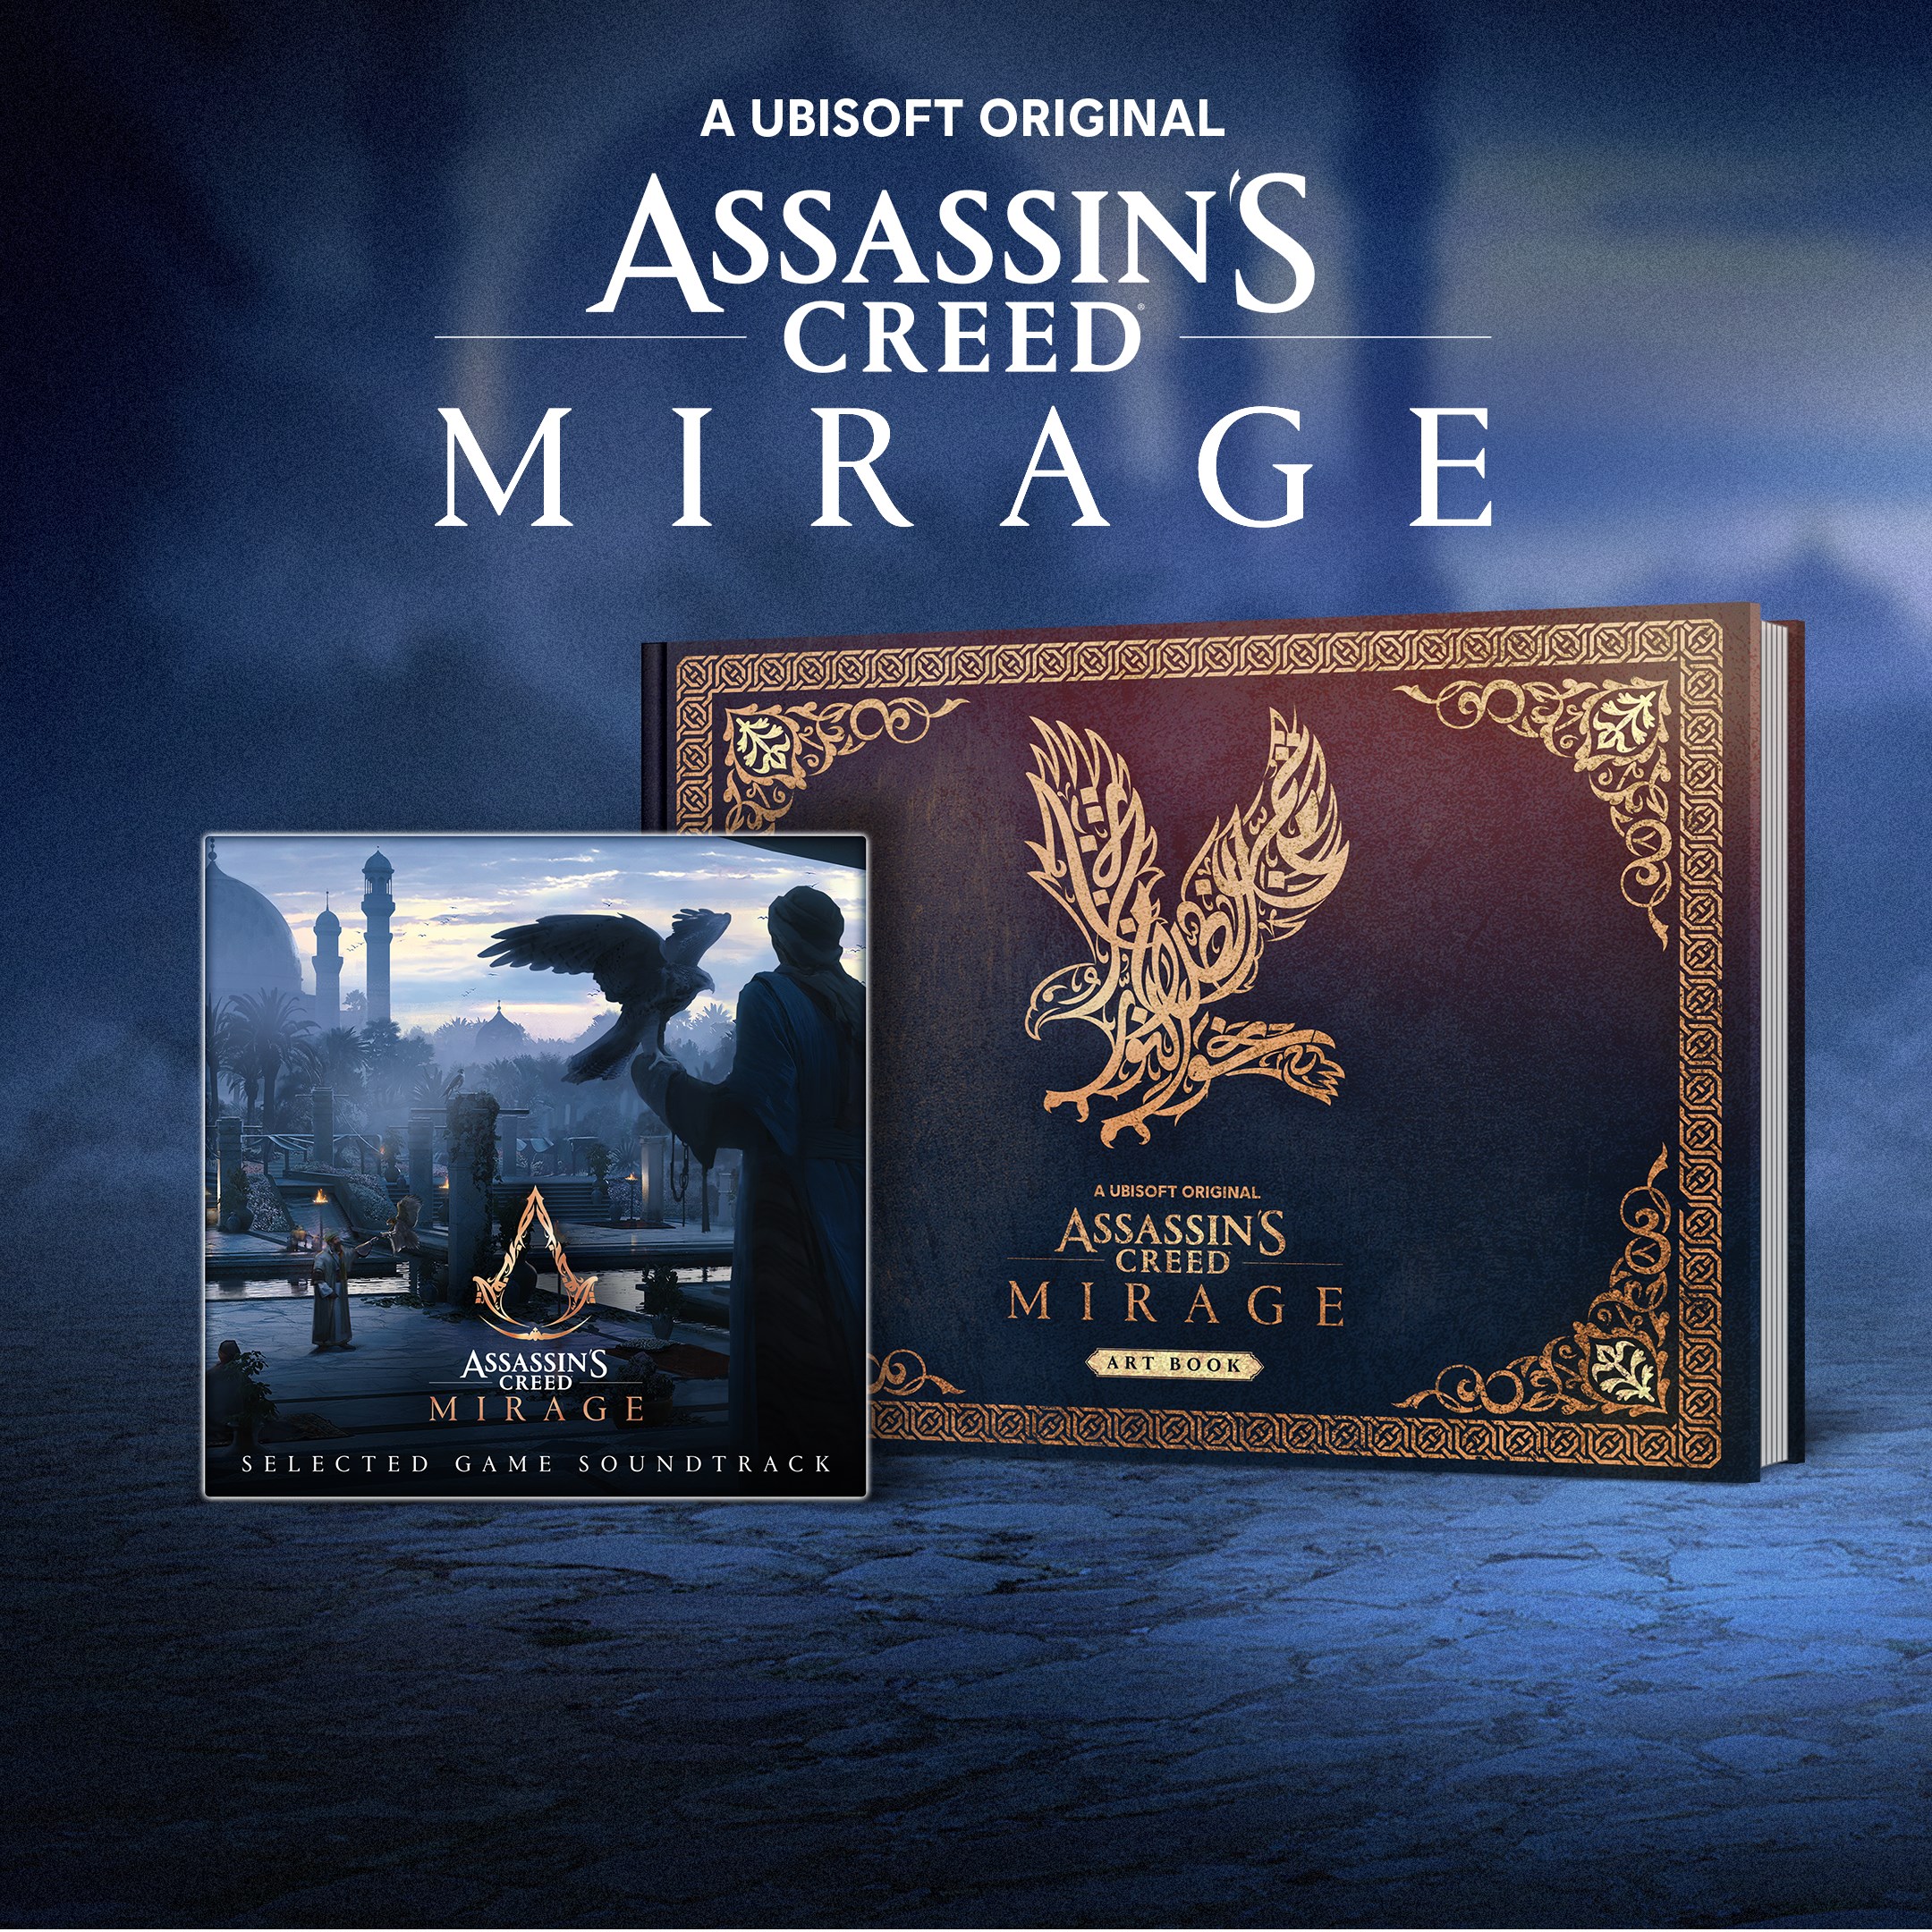 The Art of Assassin's Creed® Mirage Digital Artbook and Soundtrack